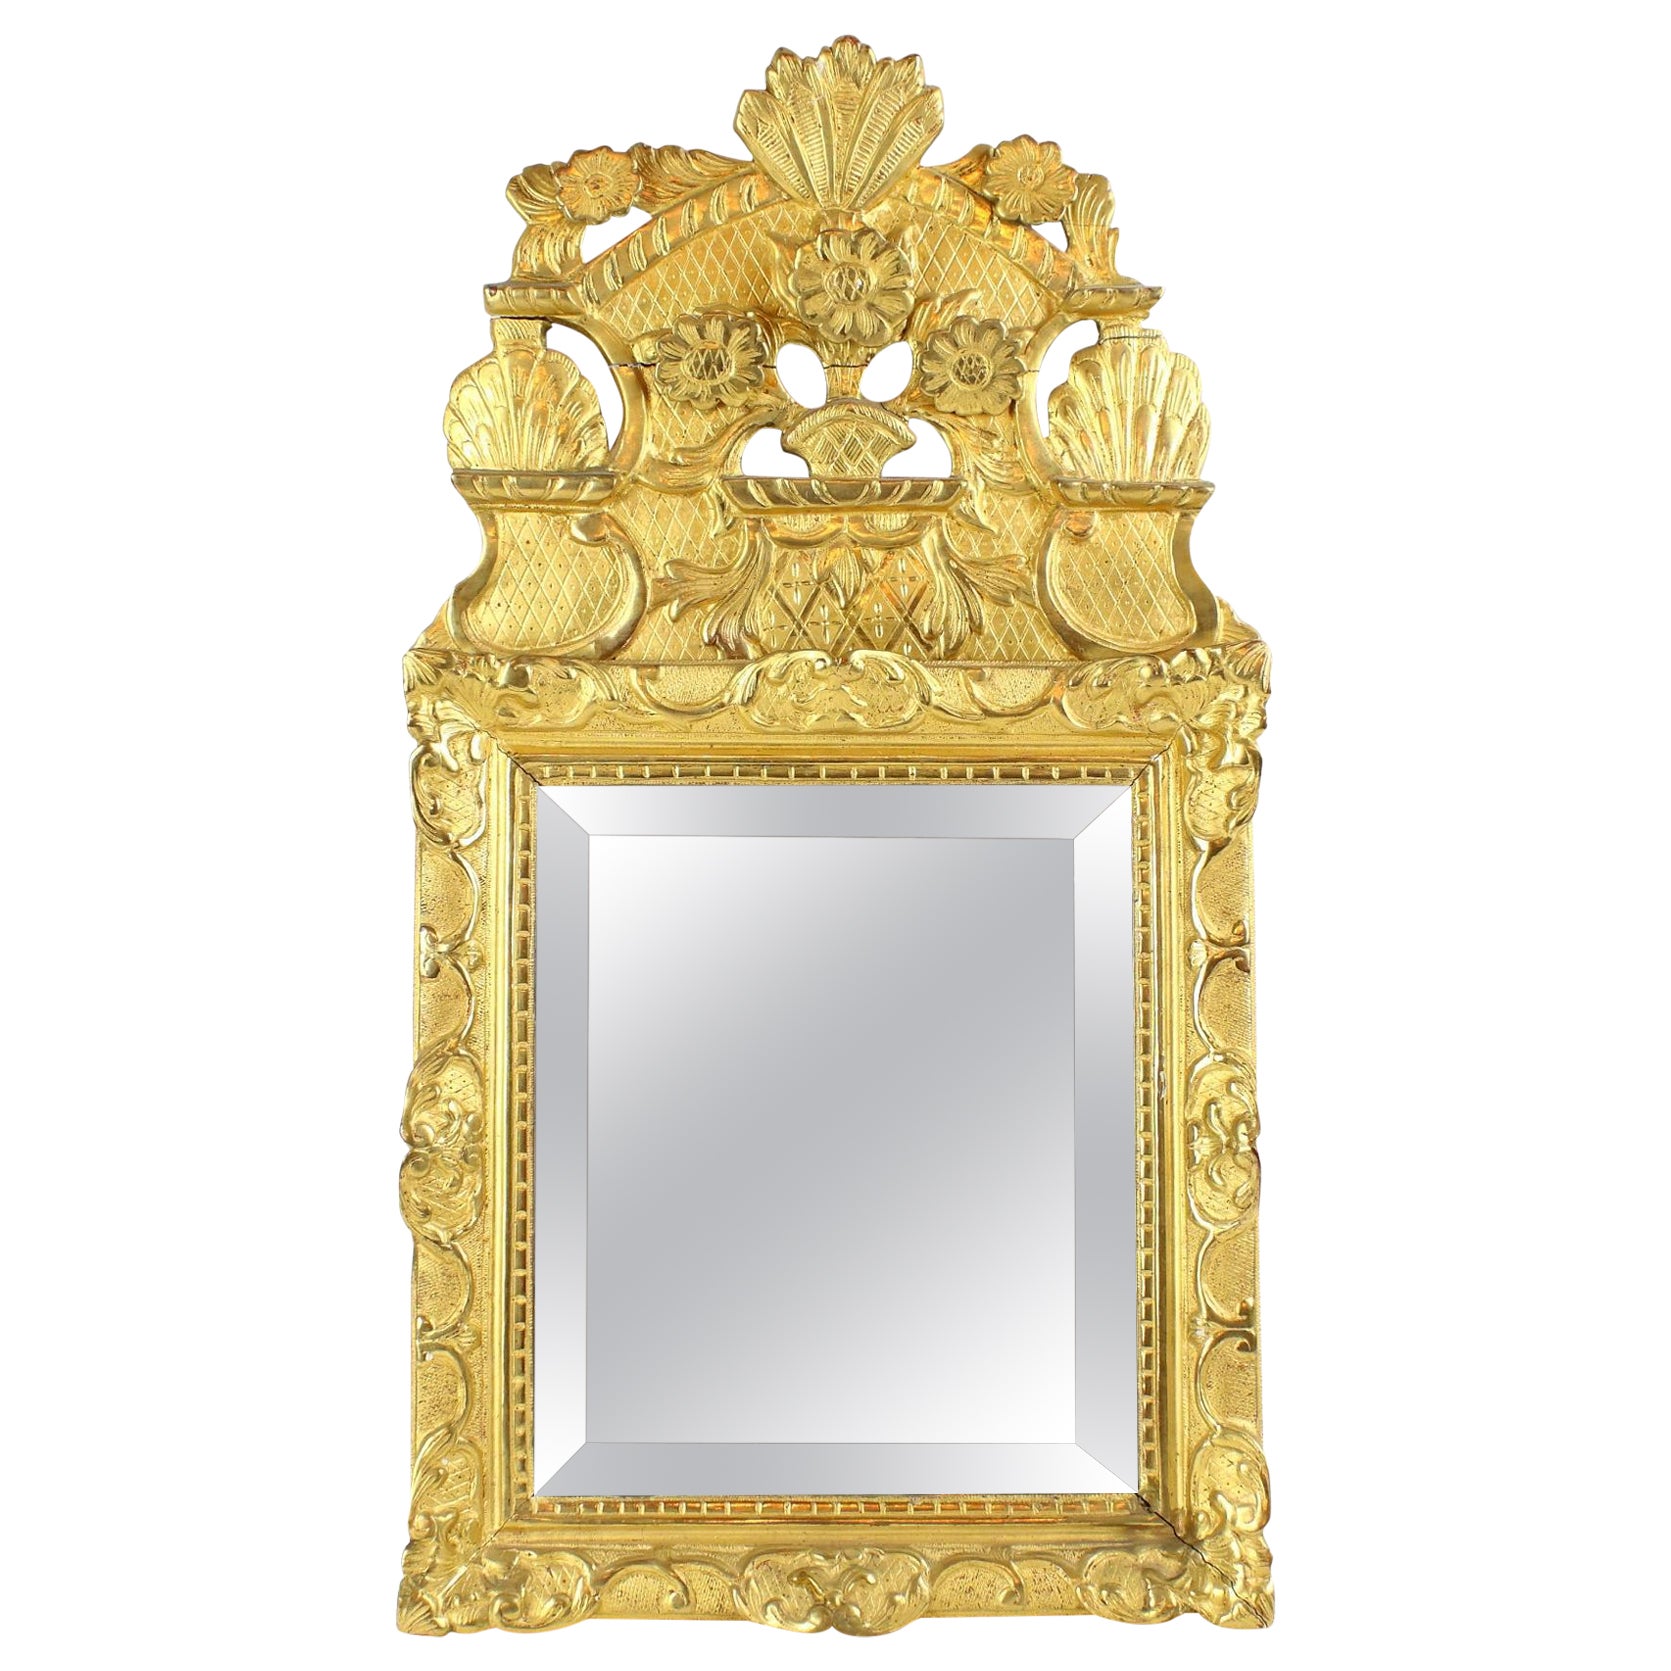 Early 18th Century French Regence Floral Giltwood Mirror